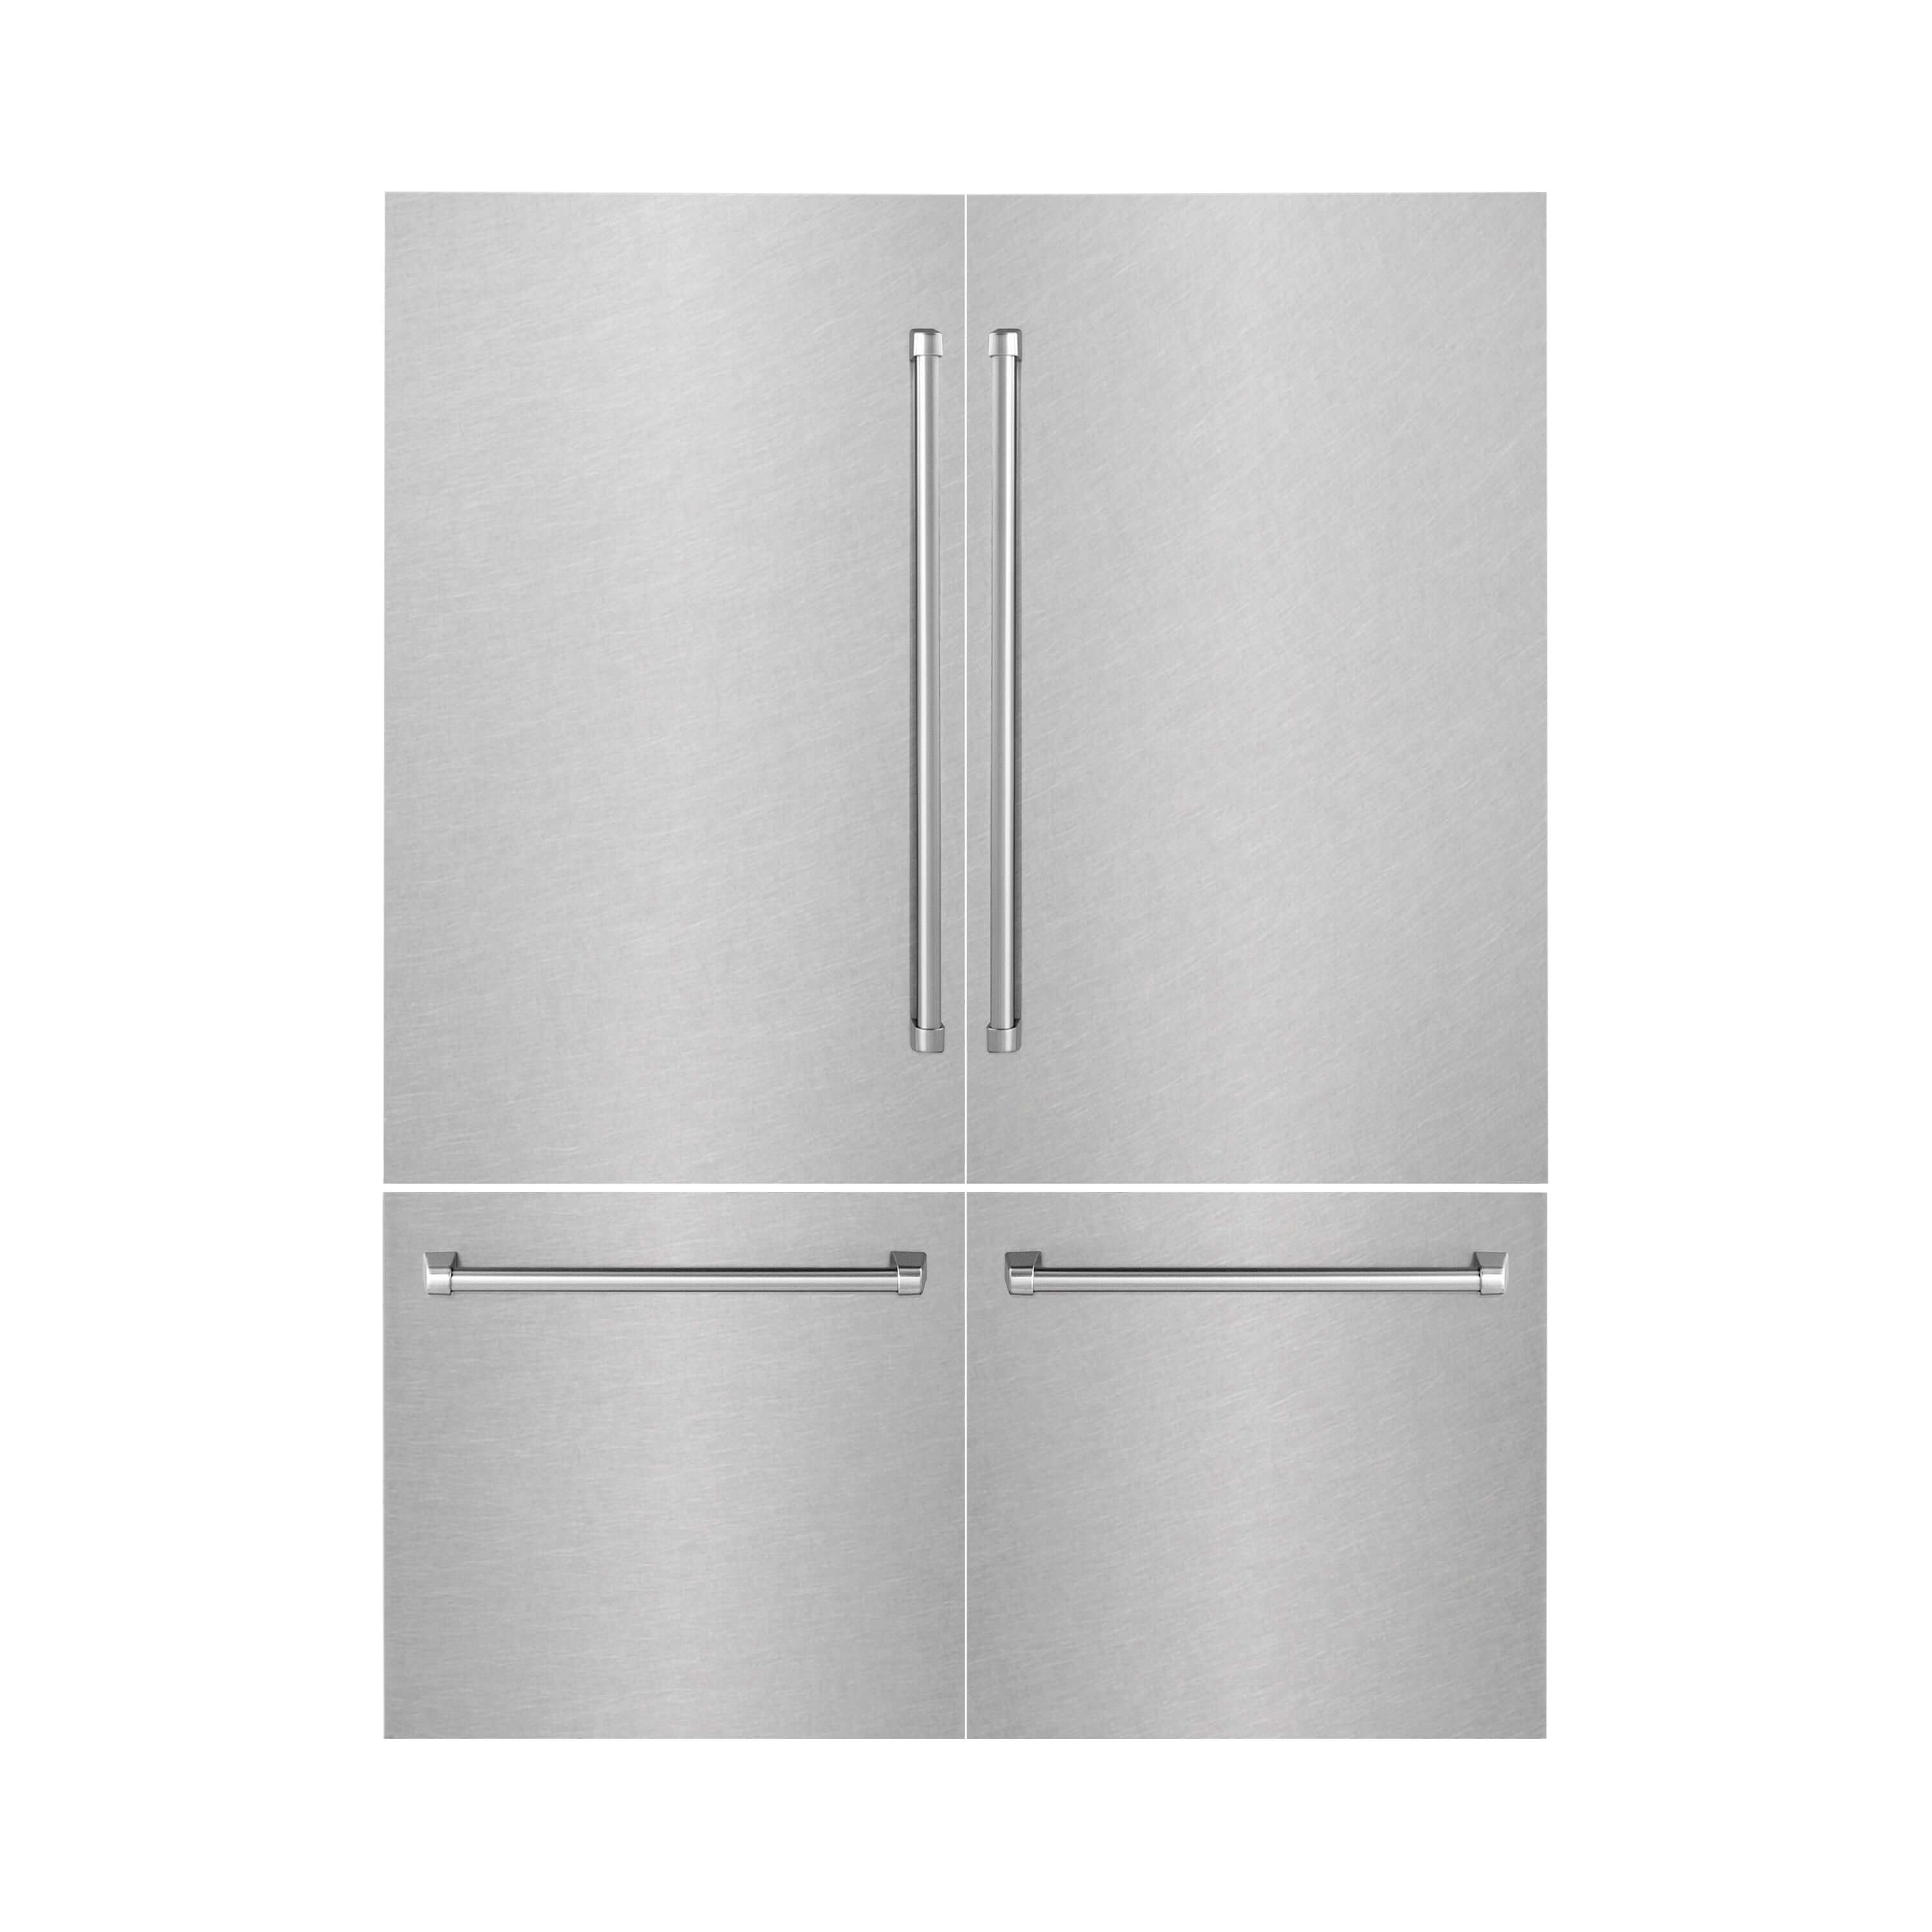 Panels & Handles Only- ZLINE 60 in. Refrigerator Panels in Fingerprint Resistant Stainless Steel for a 60 in. Built-in Refrigerator (RPBIV-SN-60)